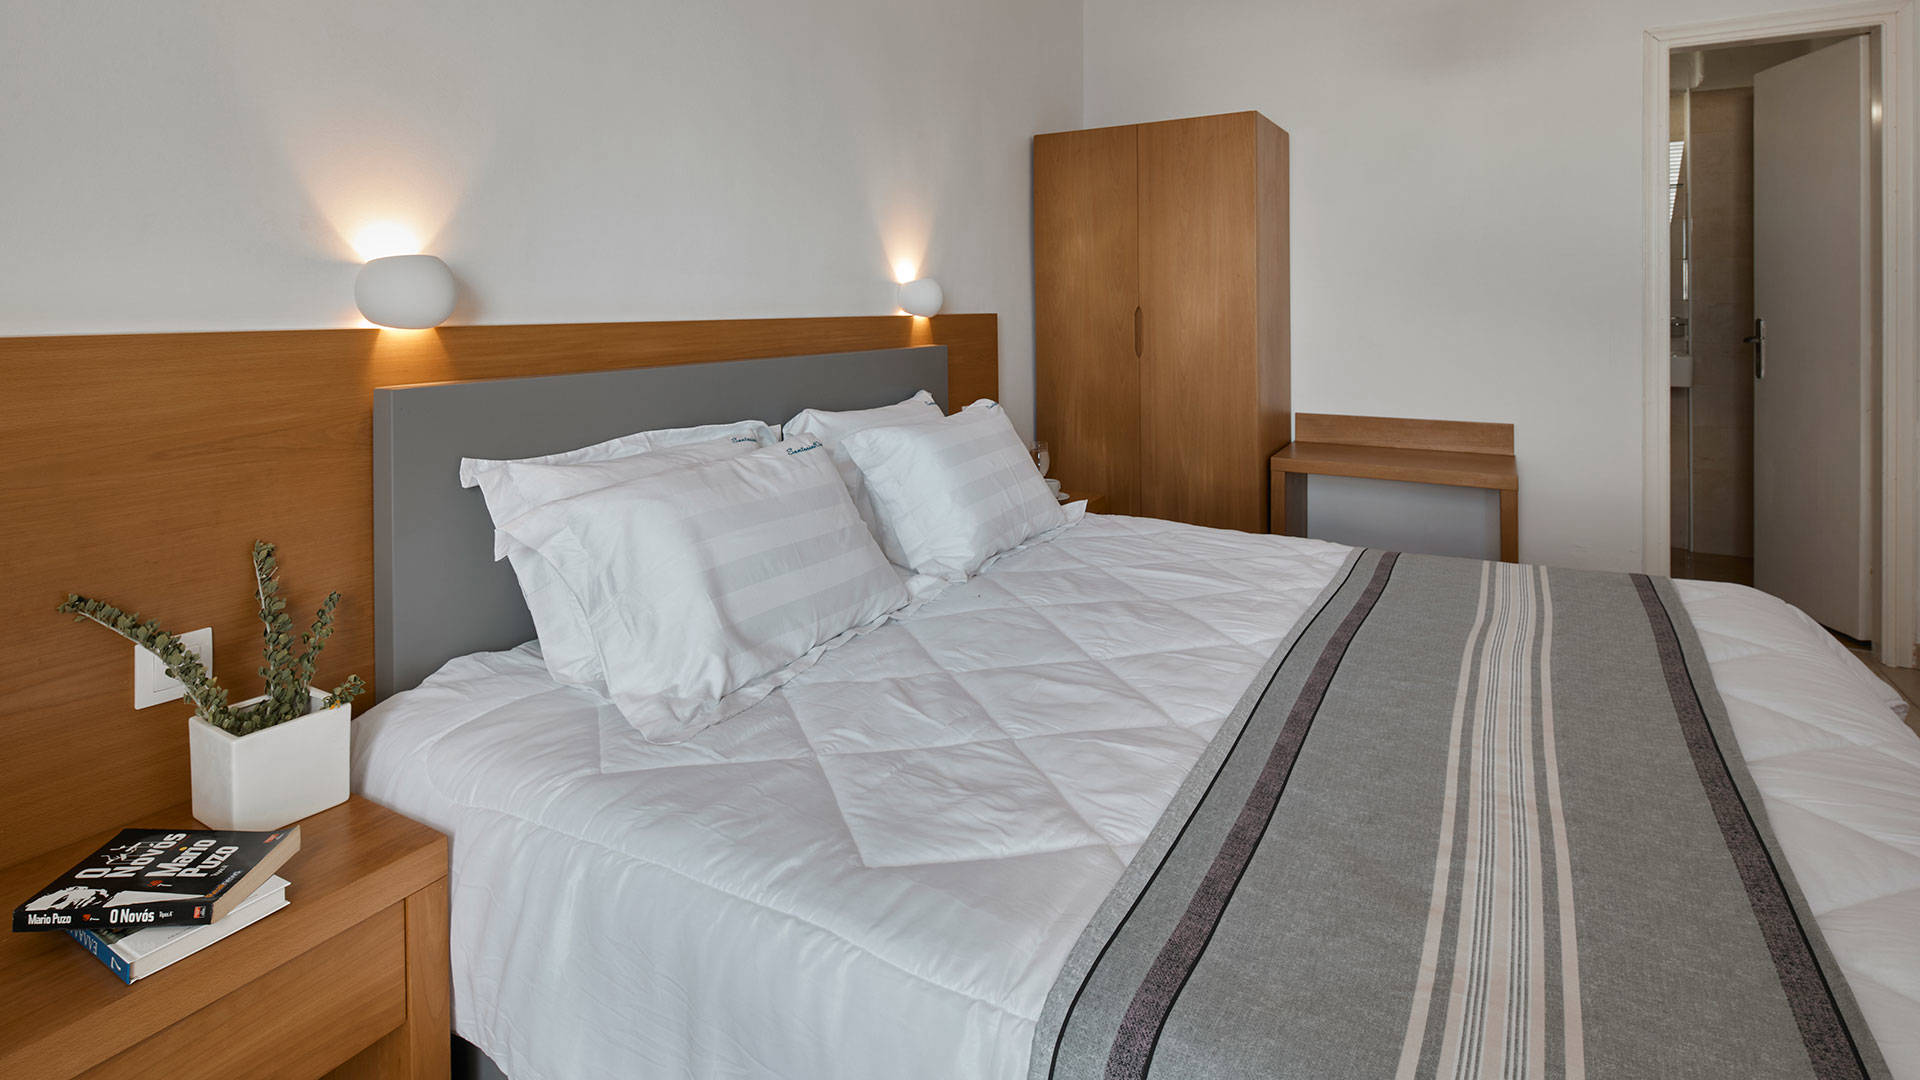 
Santorini View Hotel double bed with white linen